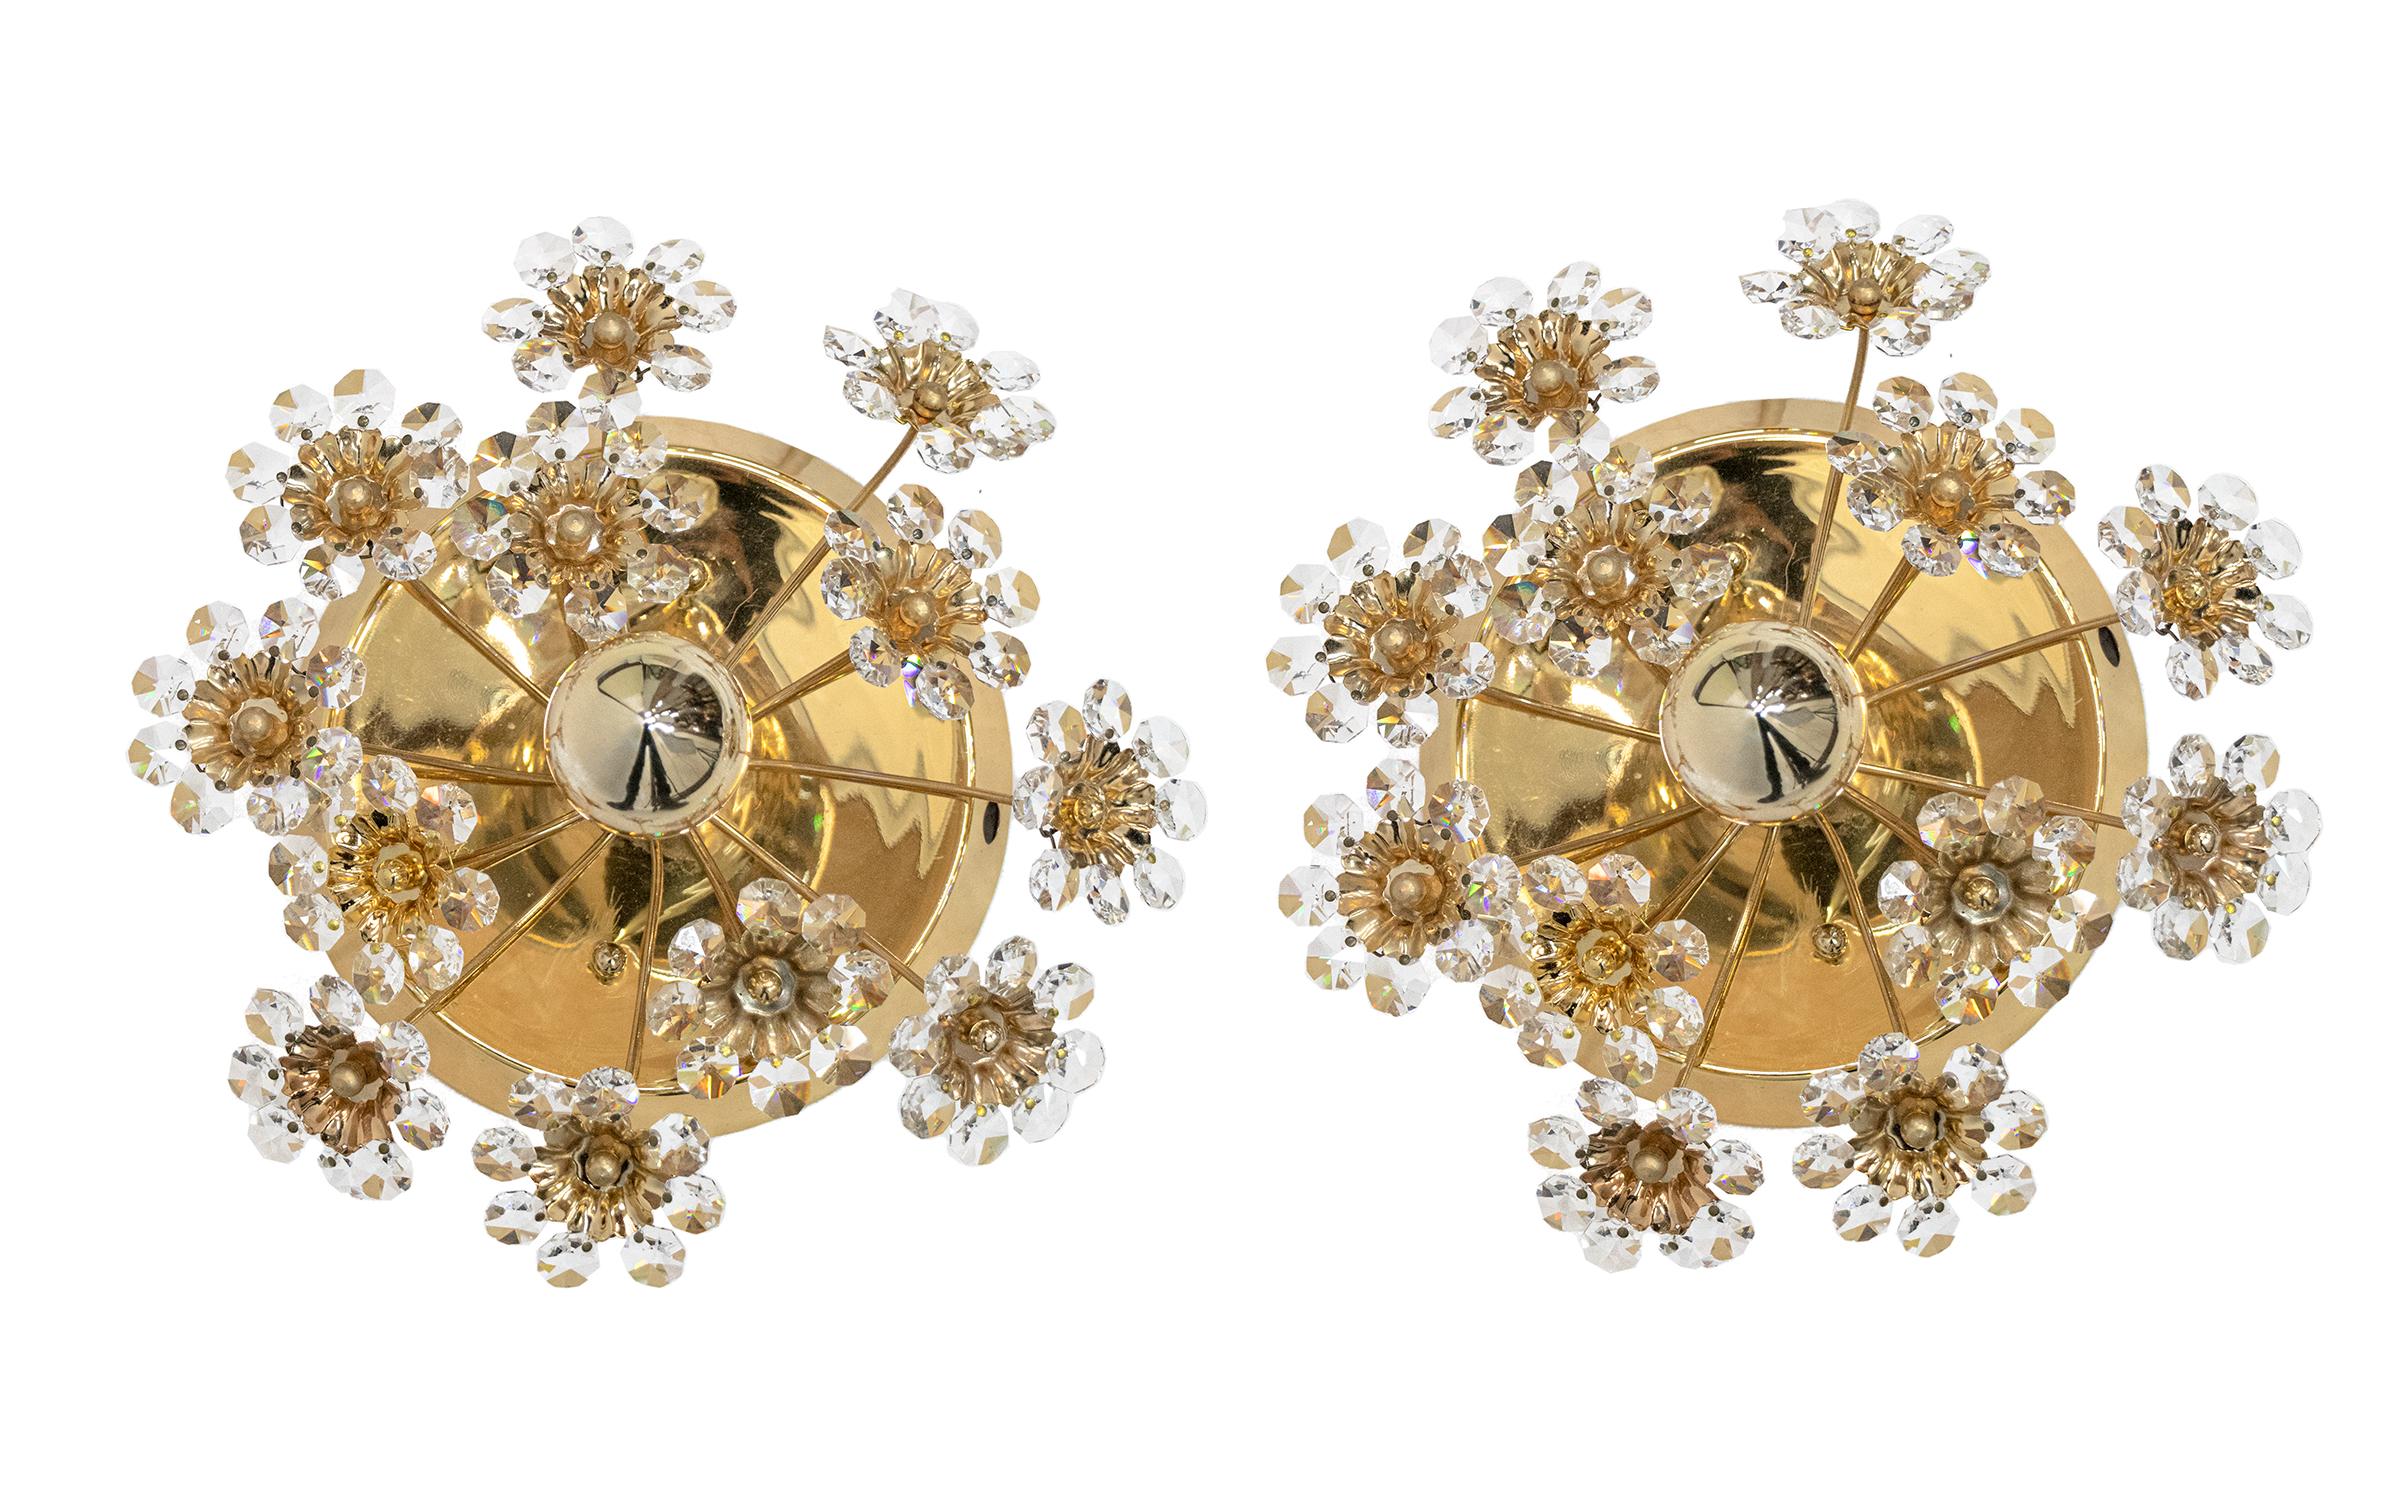 German Pair of Gold-Plated Brass and Crystal Glass Wall Lamps Sconces by Palwa, 1960 For Sale